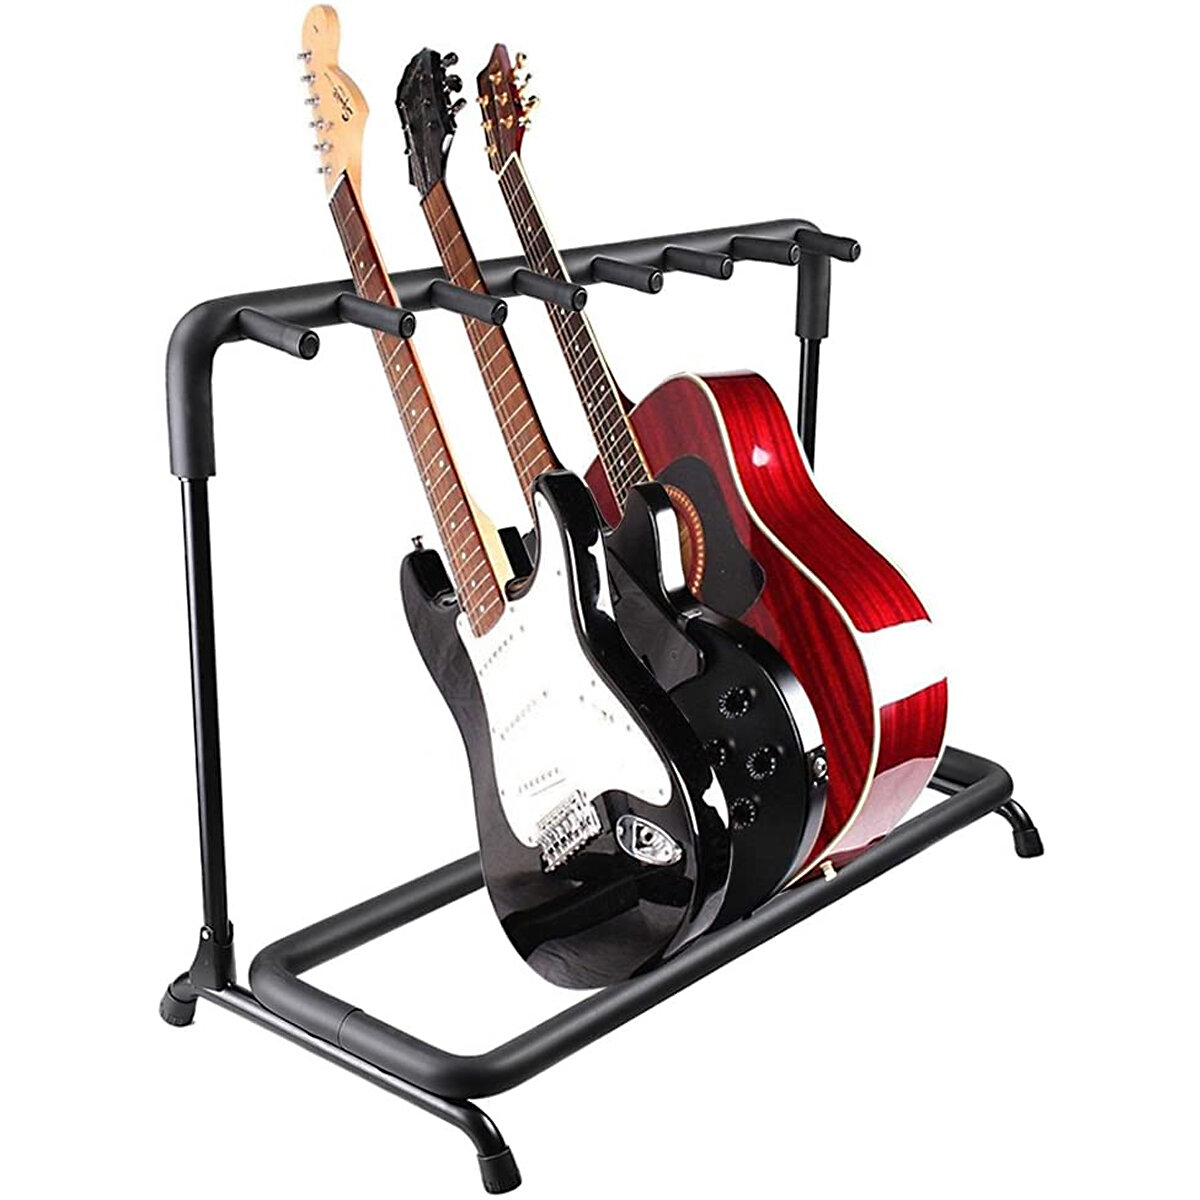 Image of Multi Guitar Stand 7 Holder Foldable Universal Display Rack - Portable Black Guitar Holder for Classical Acoustic Elect